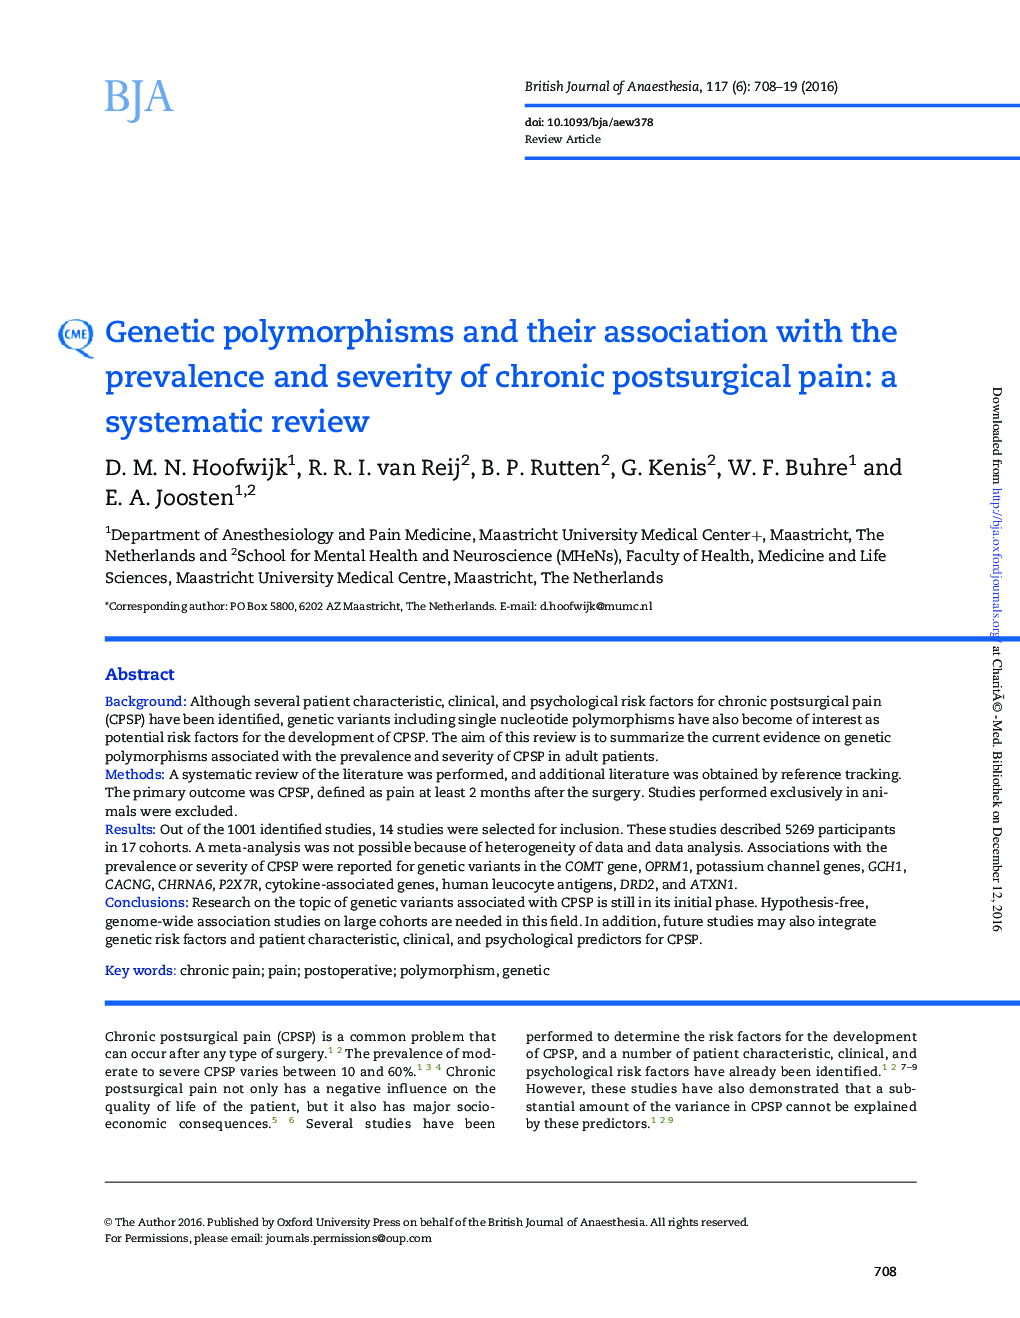 Genetic polymorphisms and their association with the prevalence and severity of chronic postsurgical pain: a systematic review